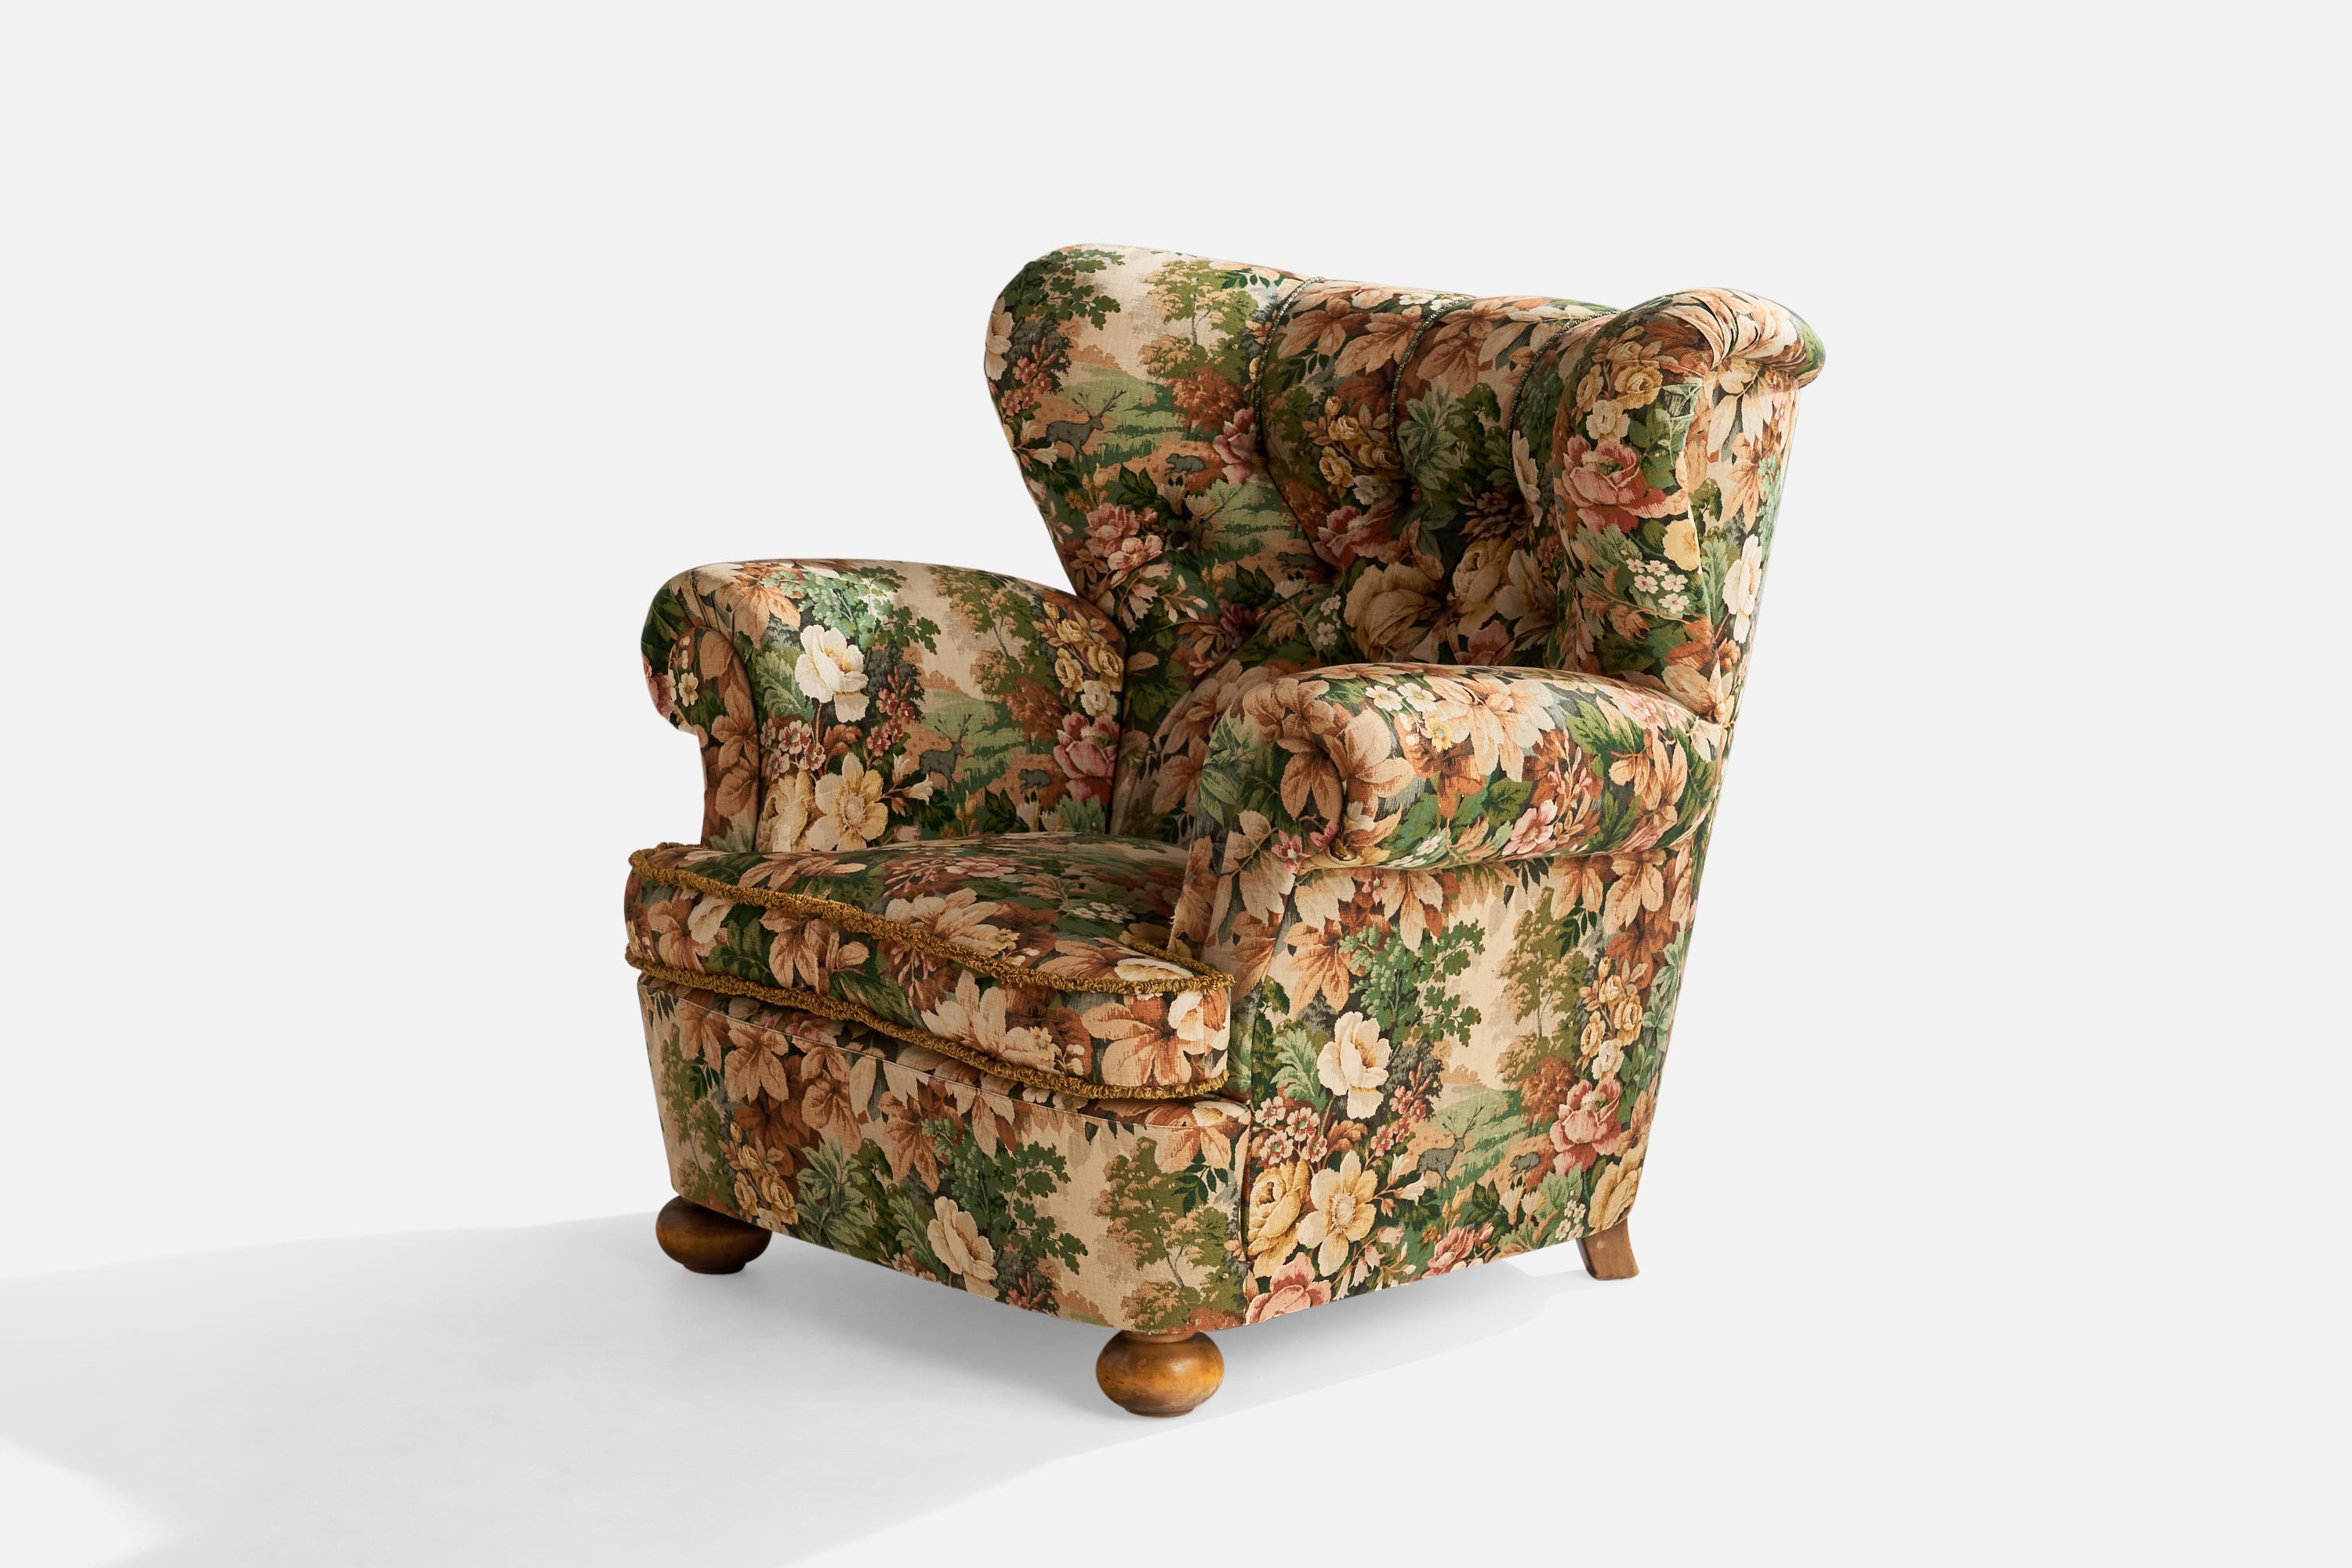 A floral fabric and wood lounge chair designed and produced in Sweden, c. 1930s.

Seat height 16”
